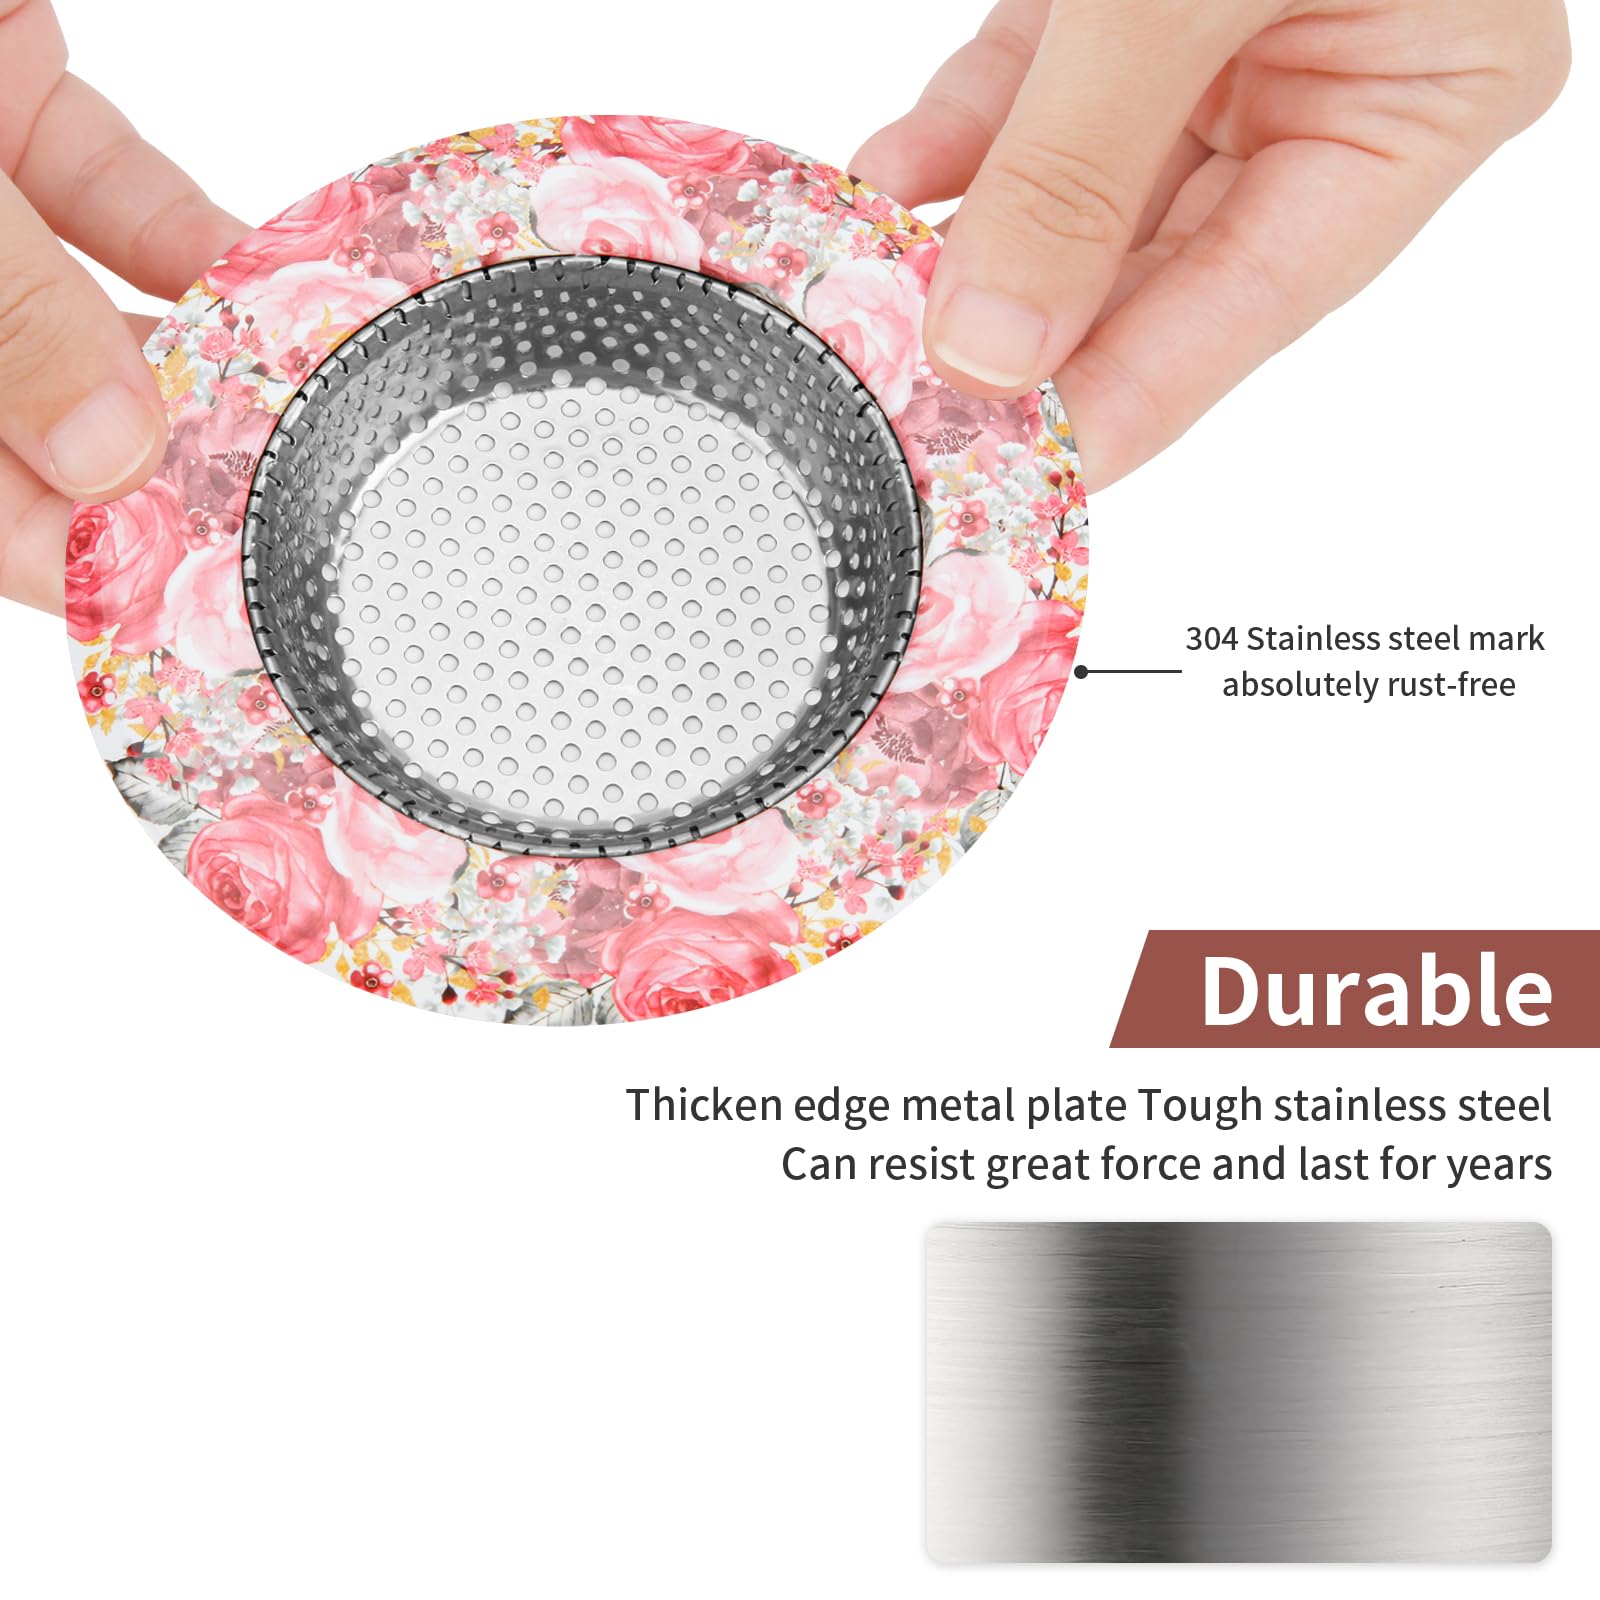 Kitchen Sink Drain Strainer, Raings 2Pcs Sink Drain Strainer Stainless Steel, Floral Sink Strainers with Large Wide Rim 4.5" Diameter for Most Kitchen Sink Drain Basket, Pink Rose Flower